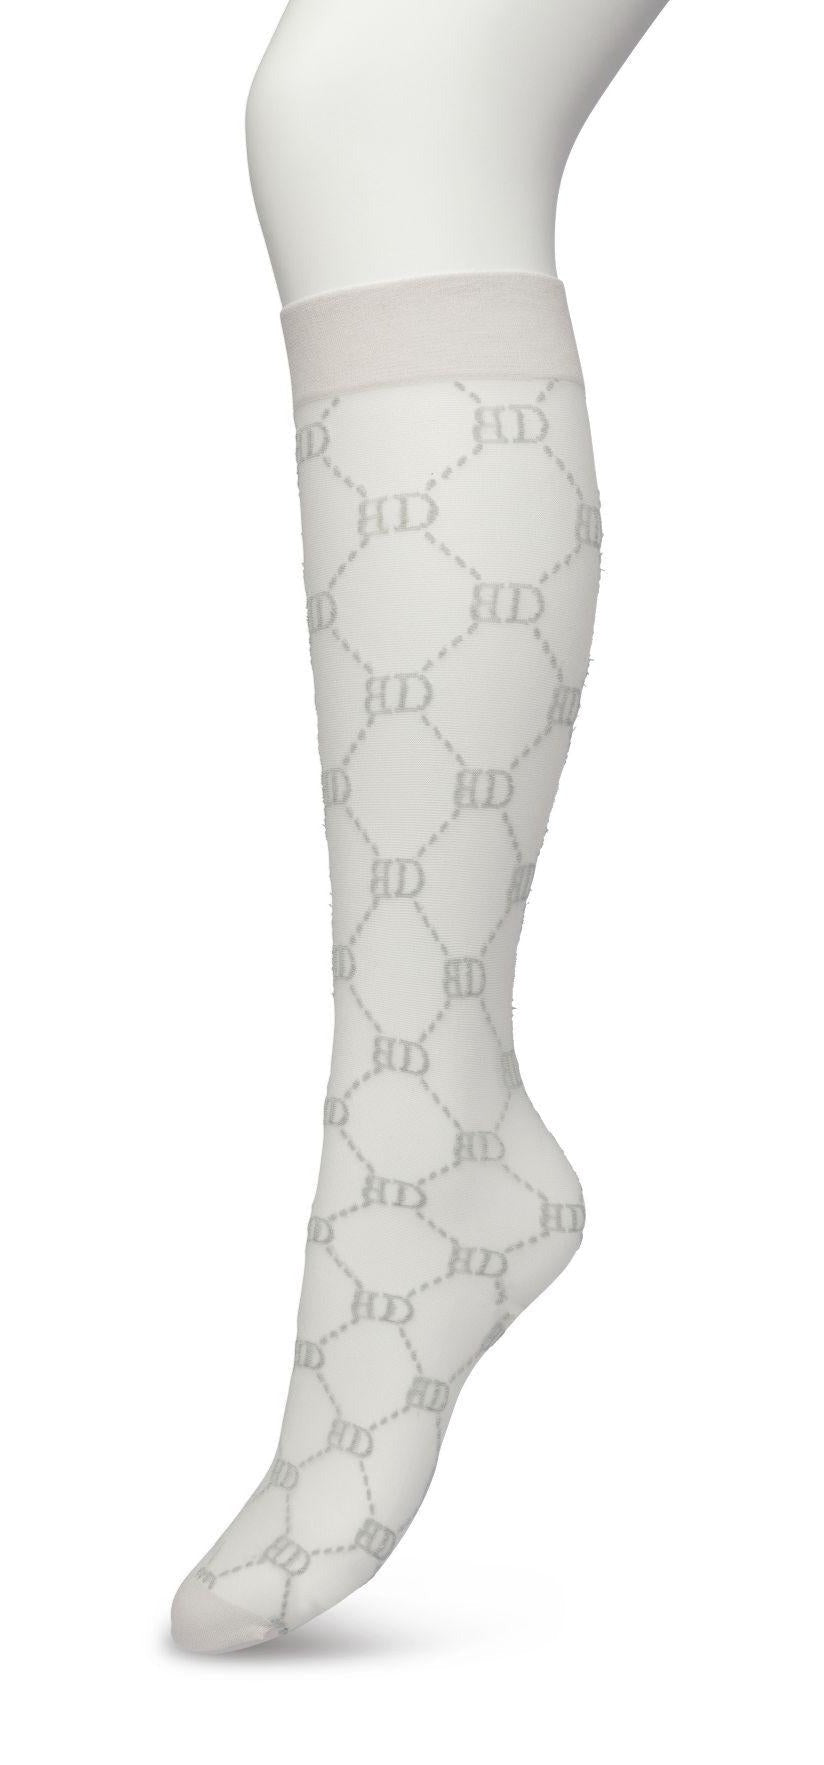 Bonnie Doon BP221801 Logo Knee-highs - Sheer pale light grey Gucci inspired fashion knee high socks with a woven dotted diamond style pattern with BD for Bonnie Doon